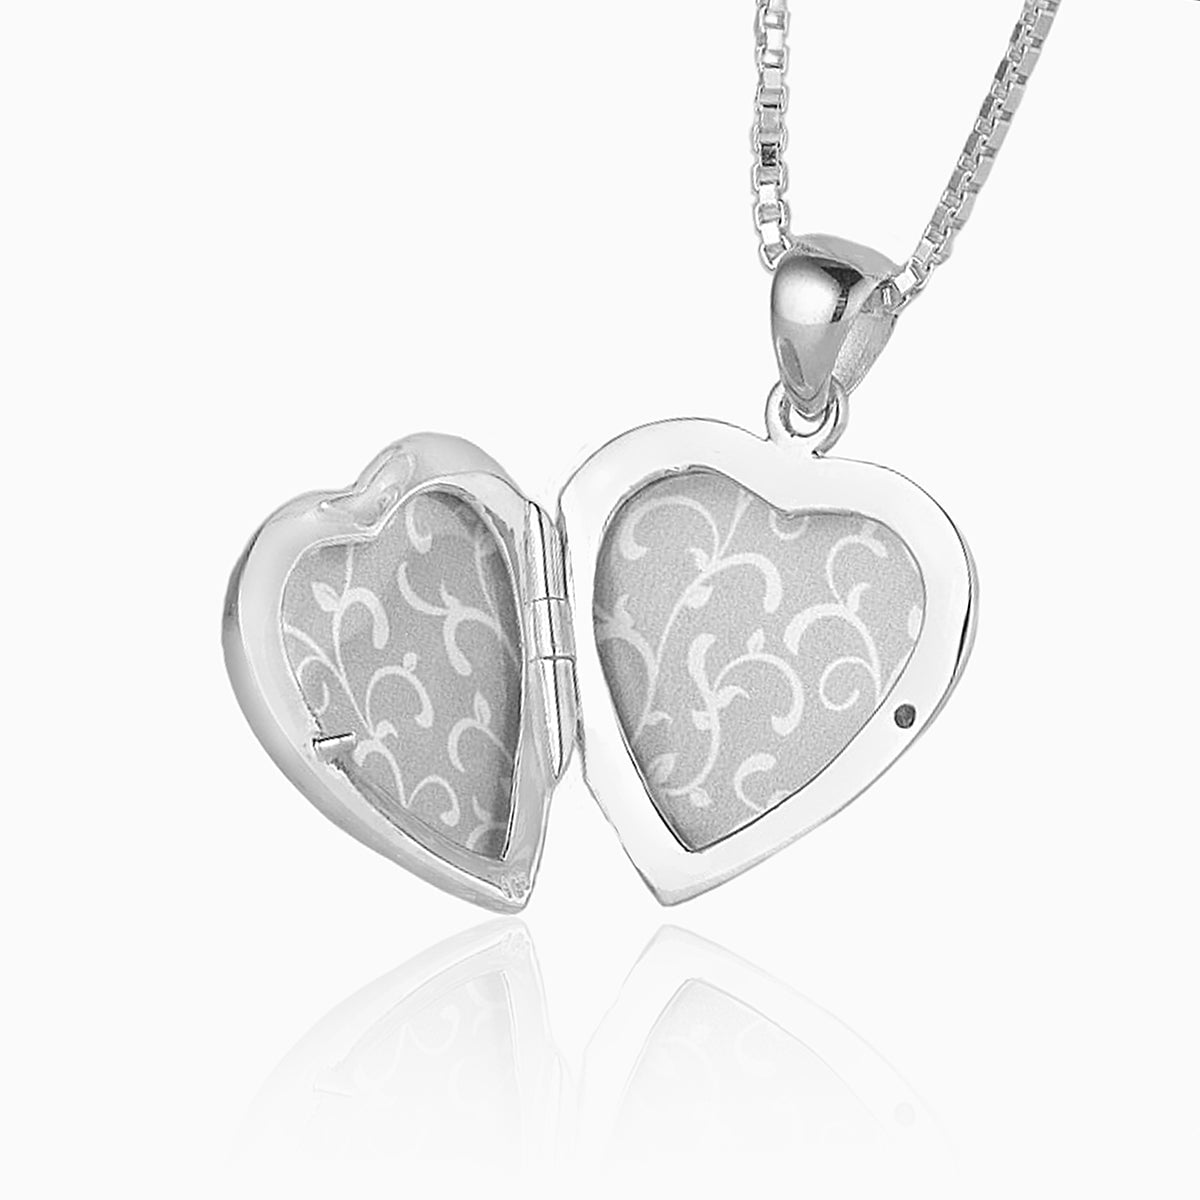 Product title: Initial Locket, product type: Locket